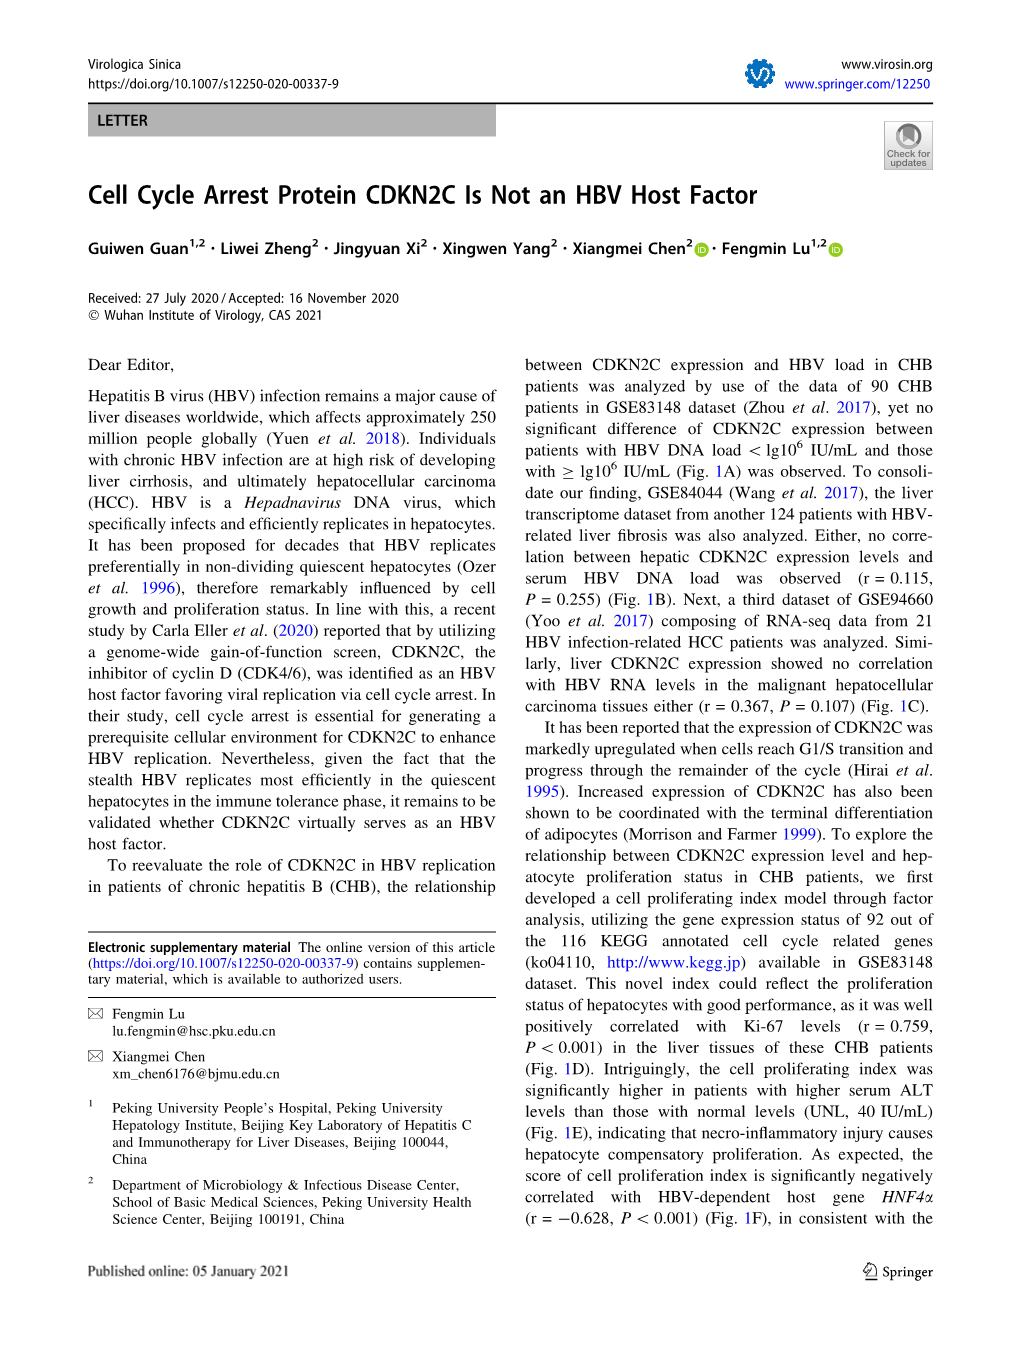 Cell Cycle Arrest Protein CDKN2C Is Not an HBV Host Factor